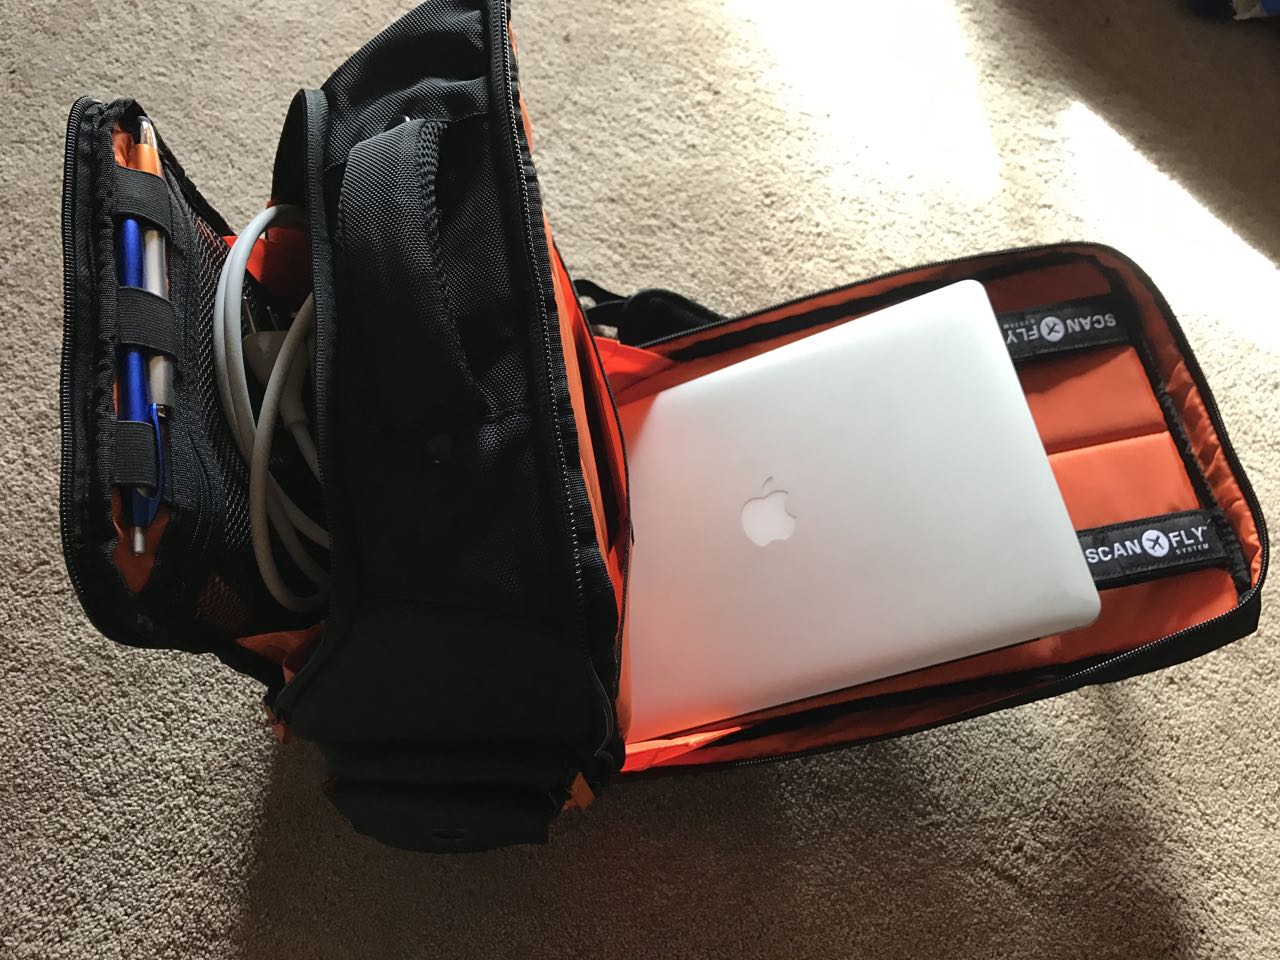 The laptop compartment unzipped all the way.